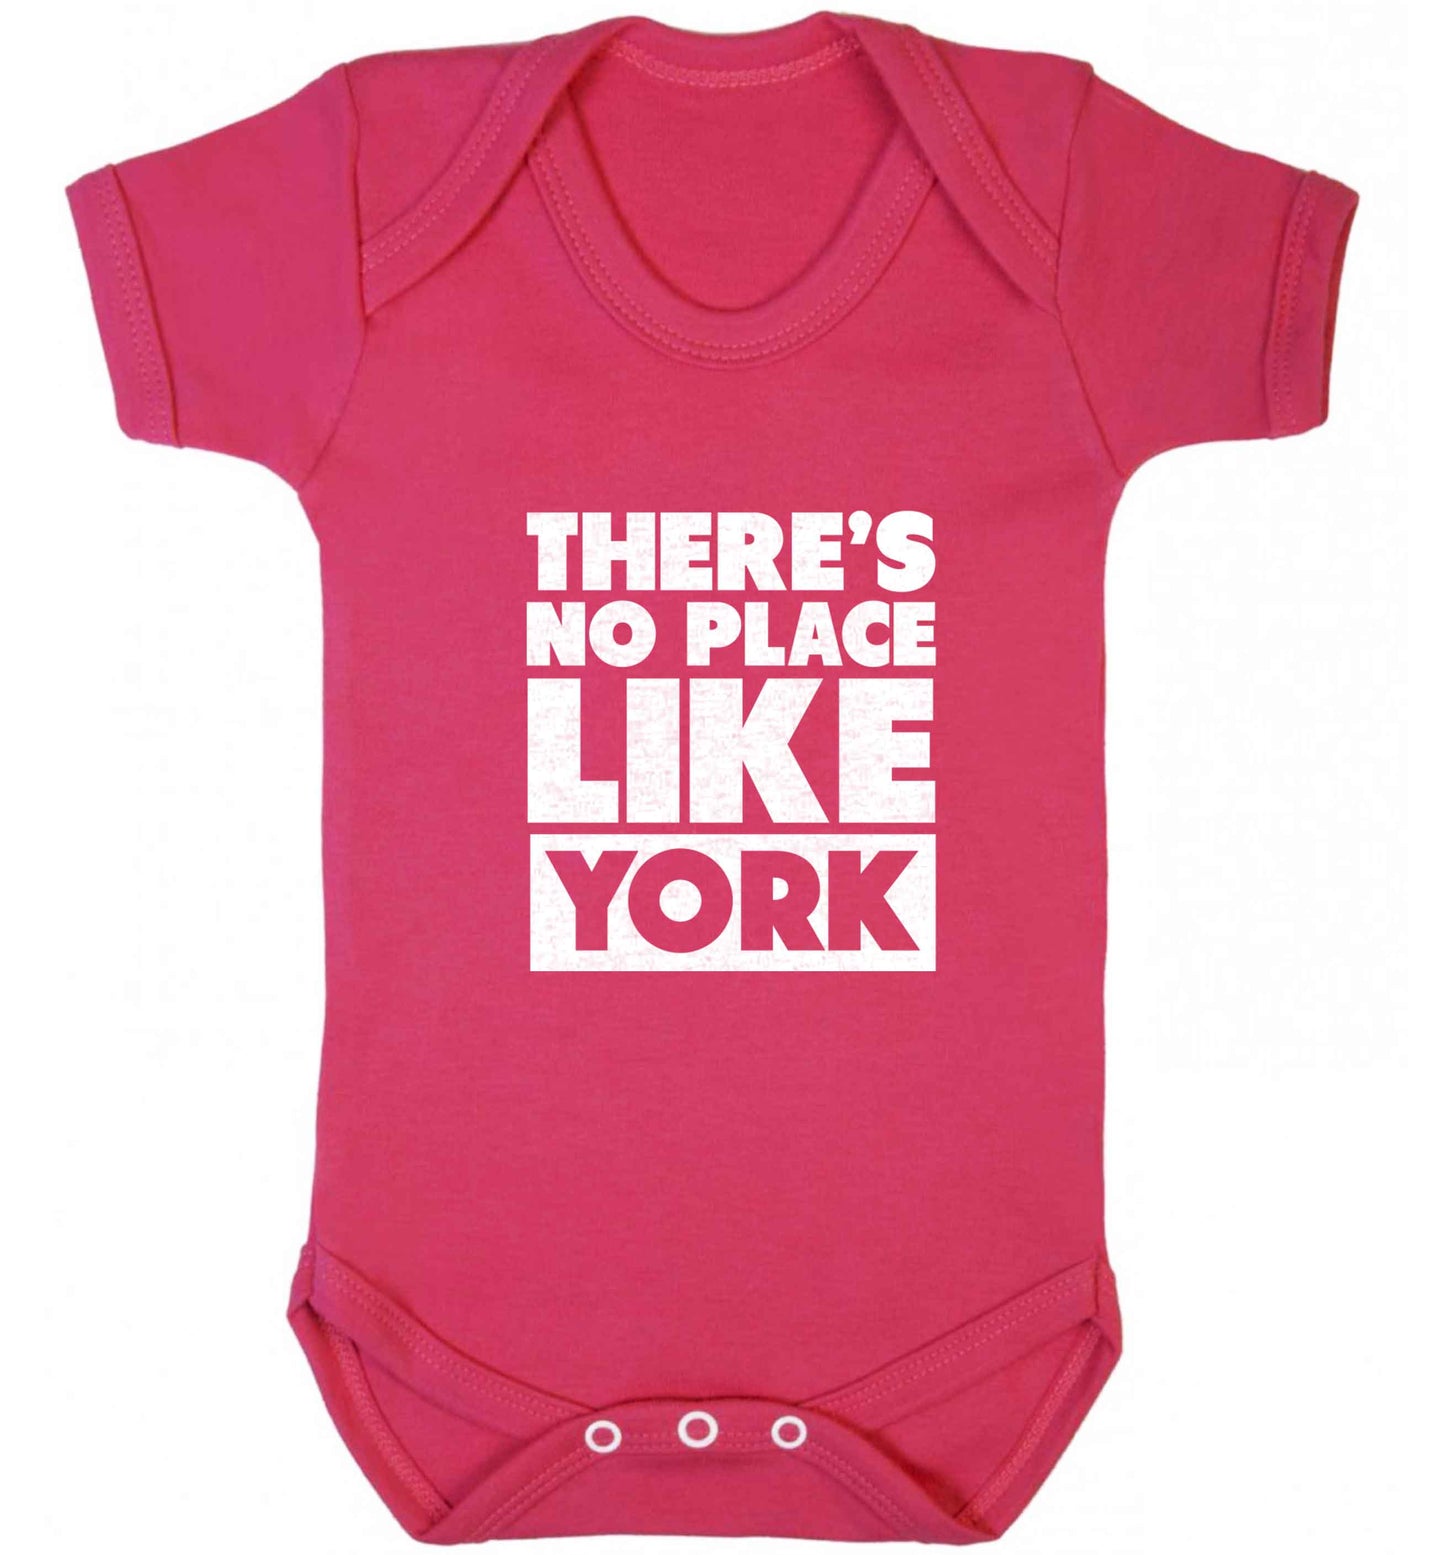 There's no place like york baby vest dark pink 18-24 months